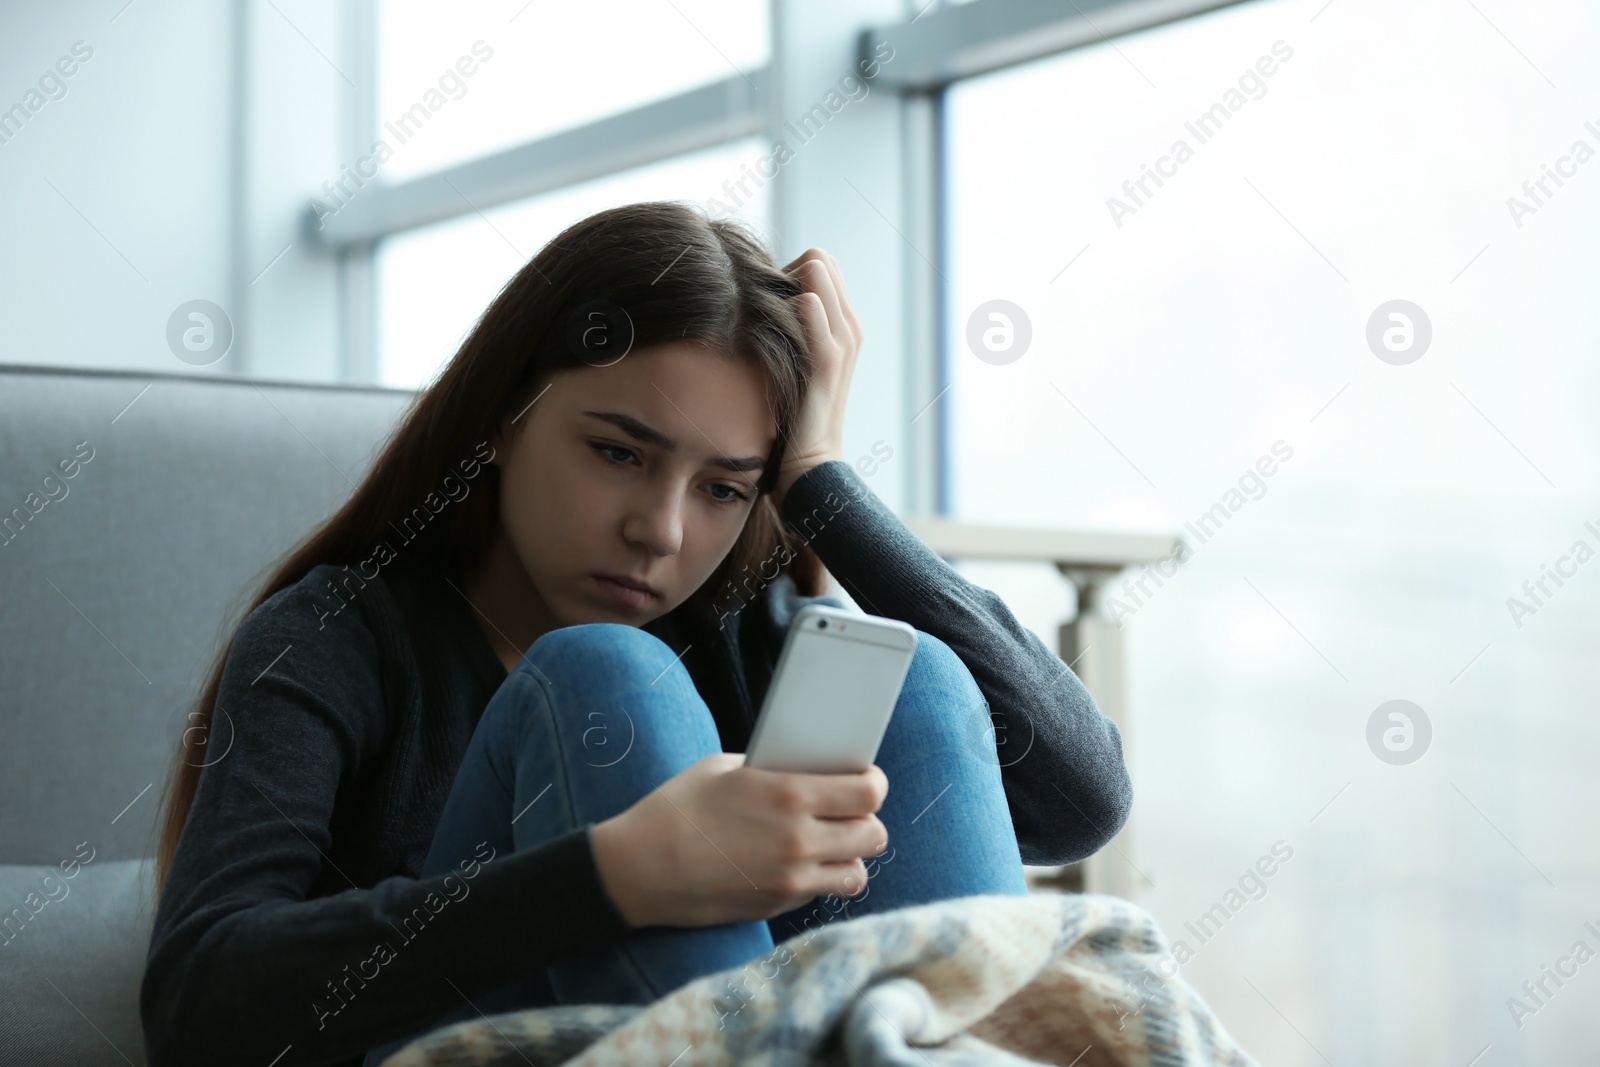 Photo of Upset teenage girl with smartphone sitting at window indoors. Space for text